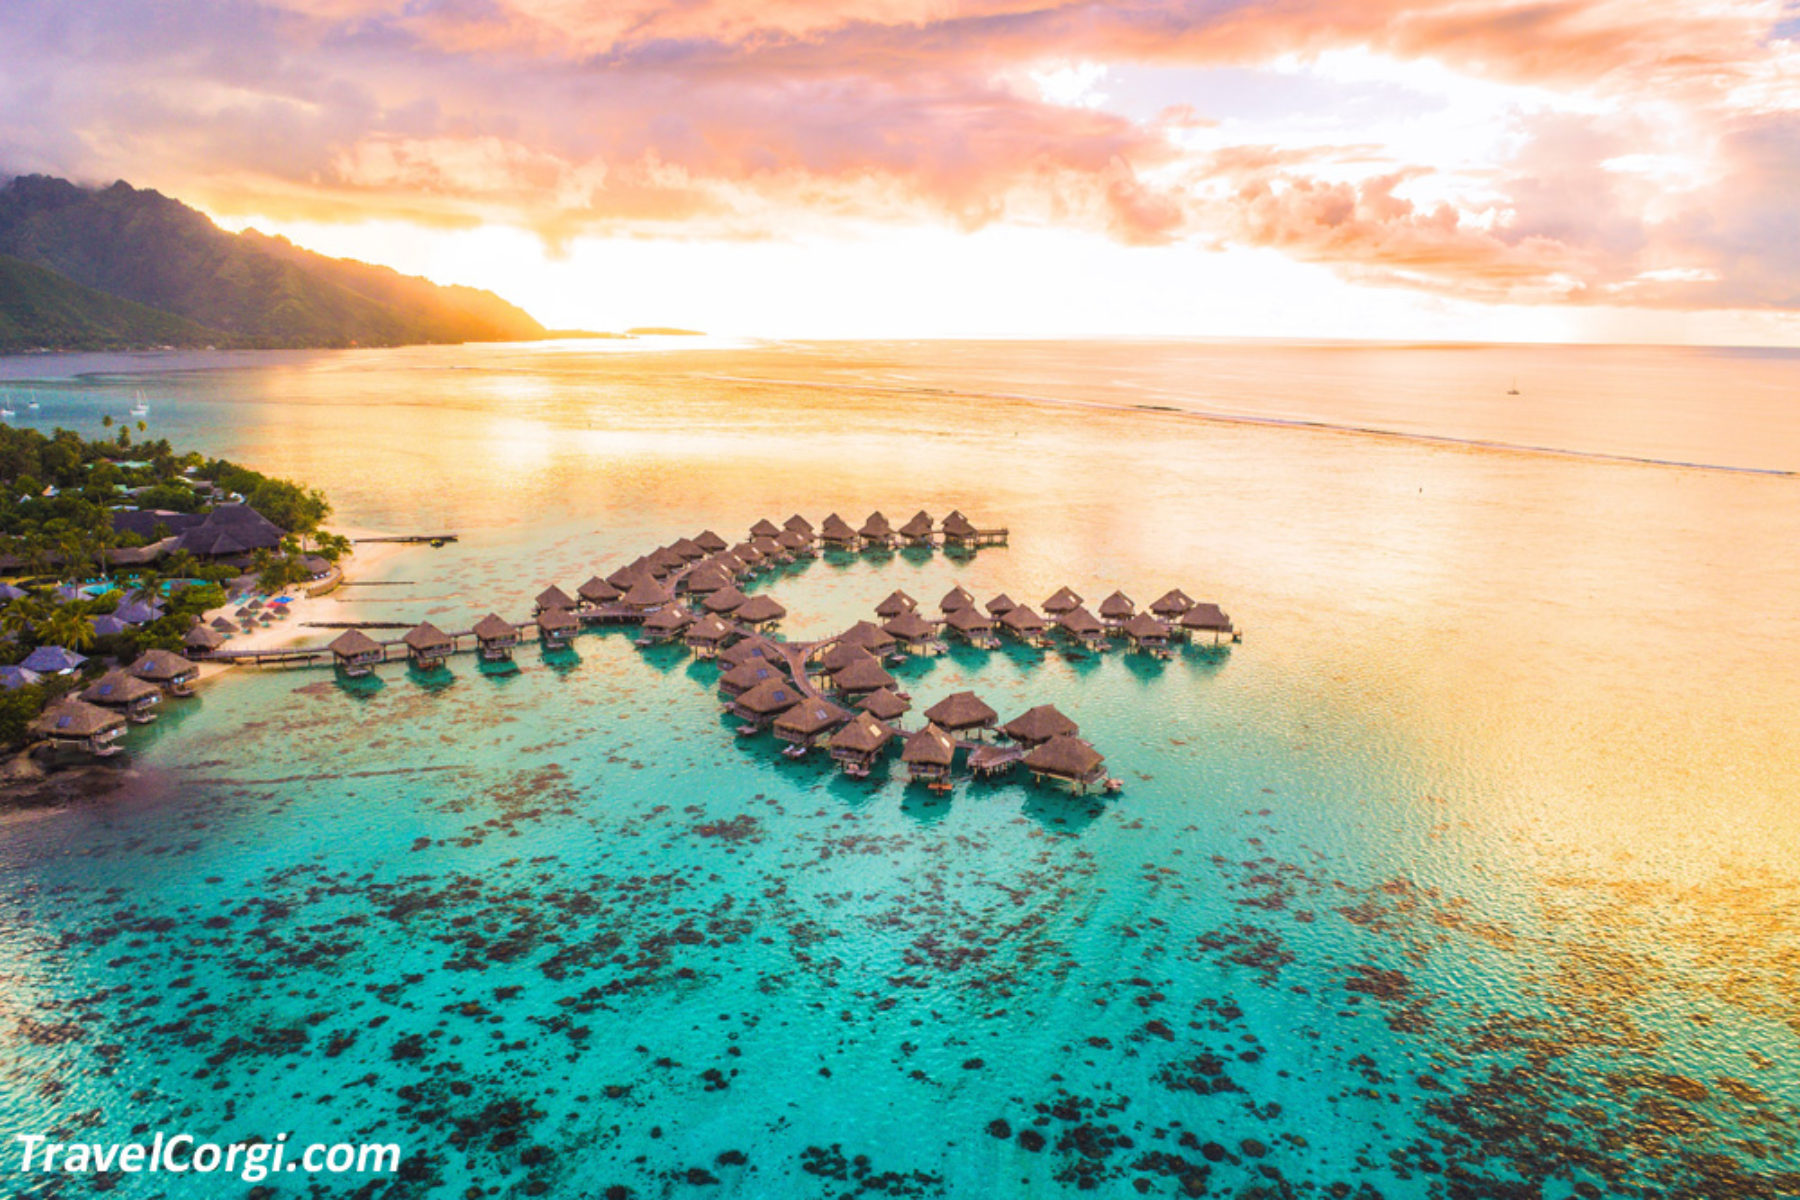 The Top 10 Things To Do in French Polynesia